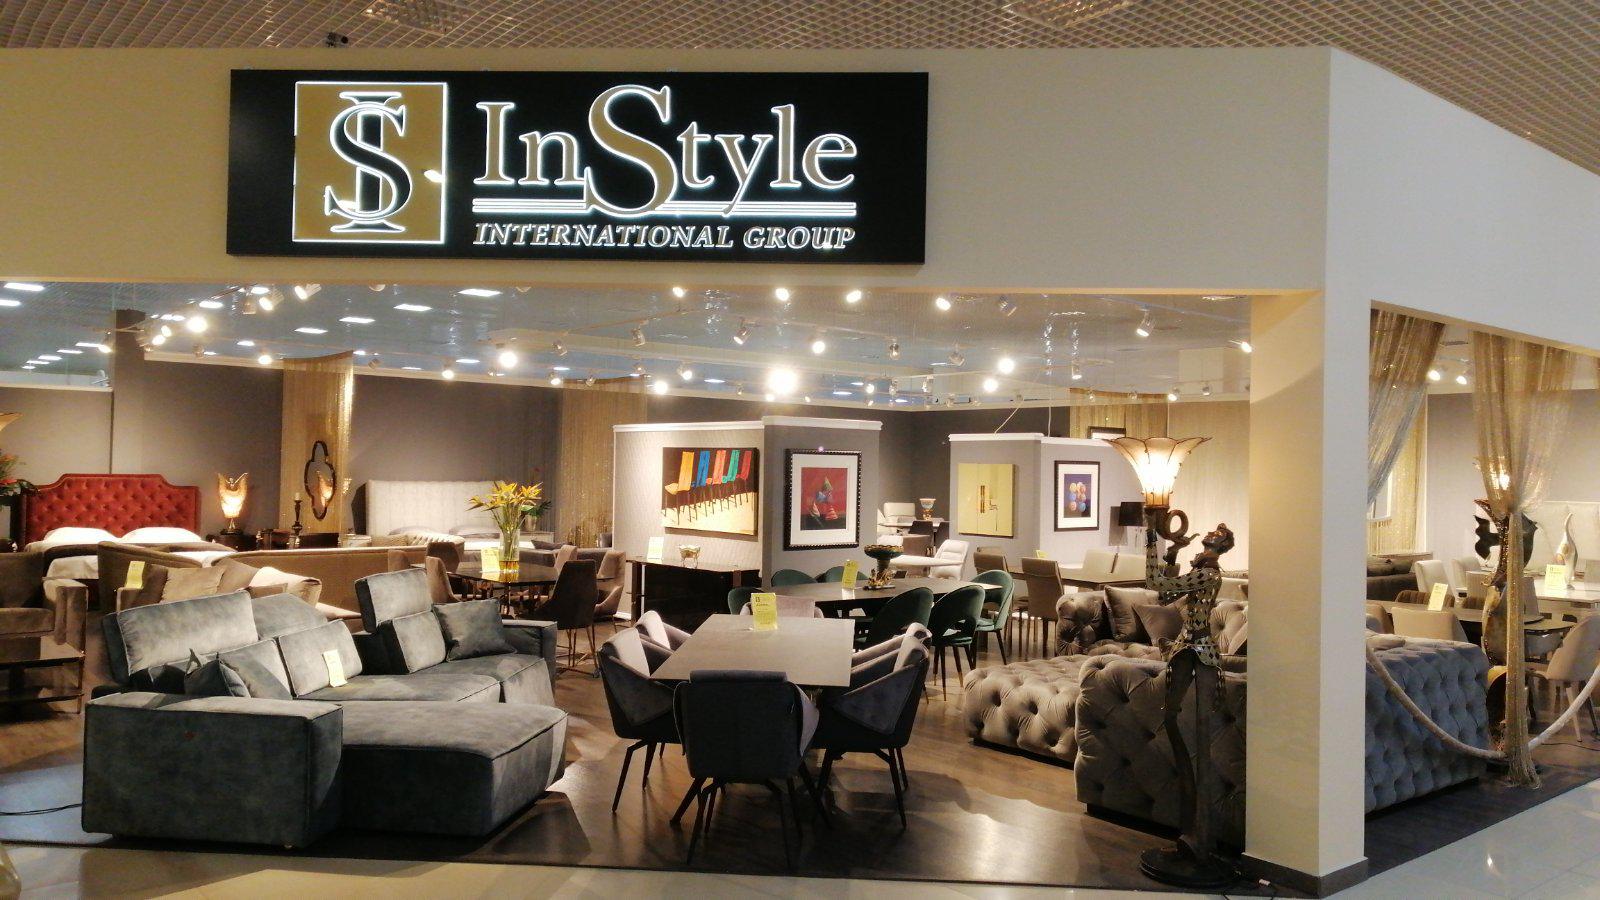 In Style International Group